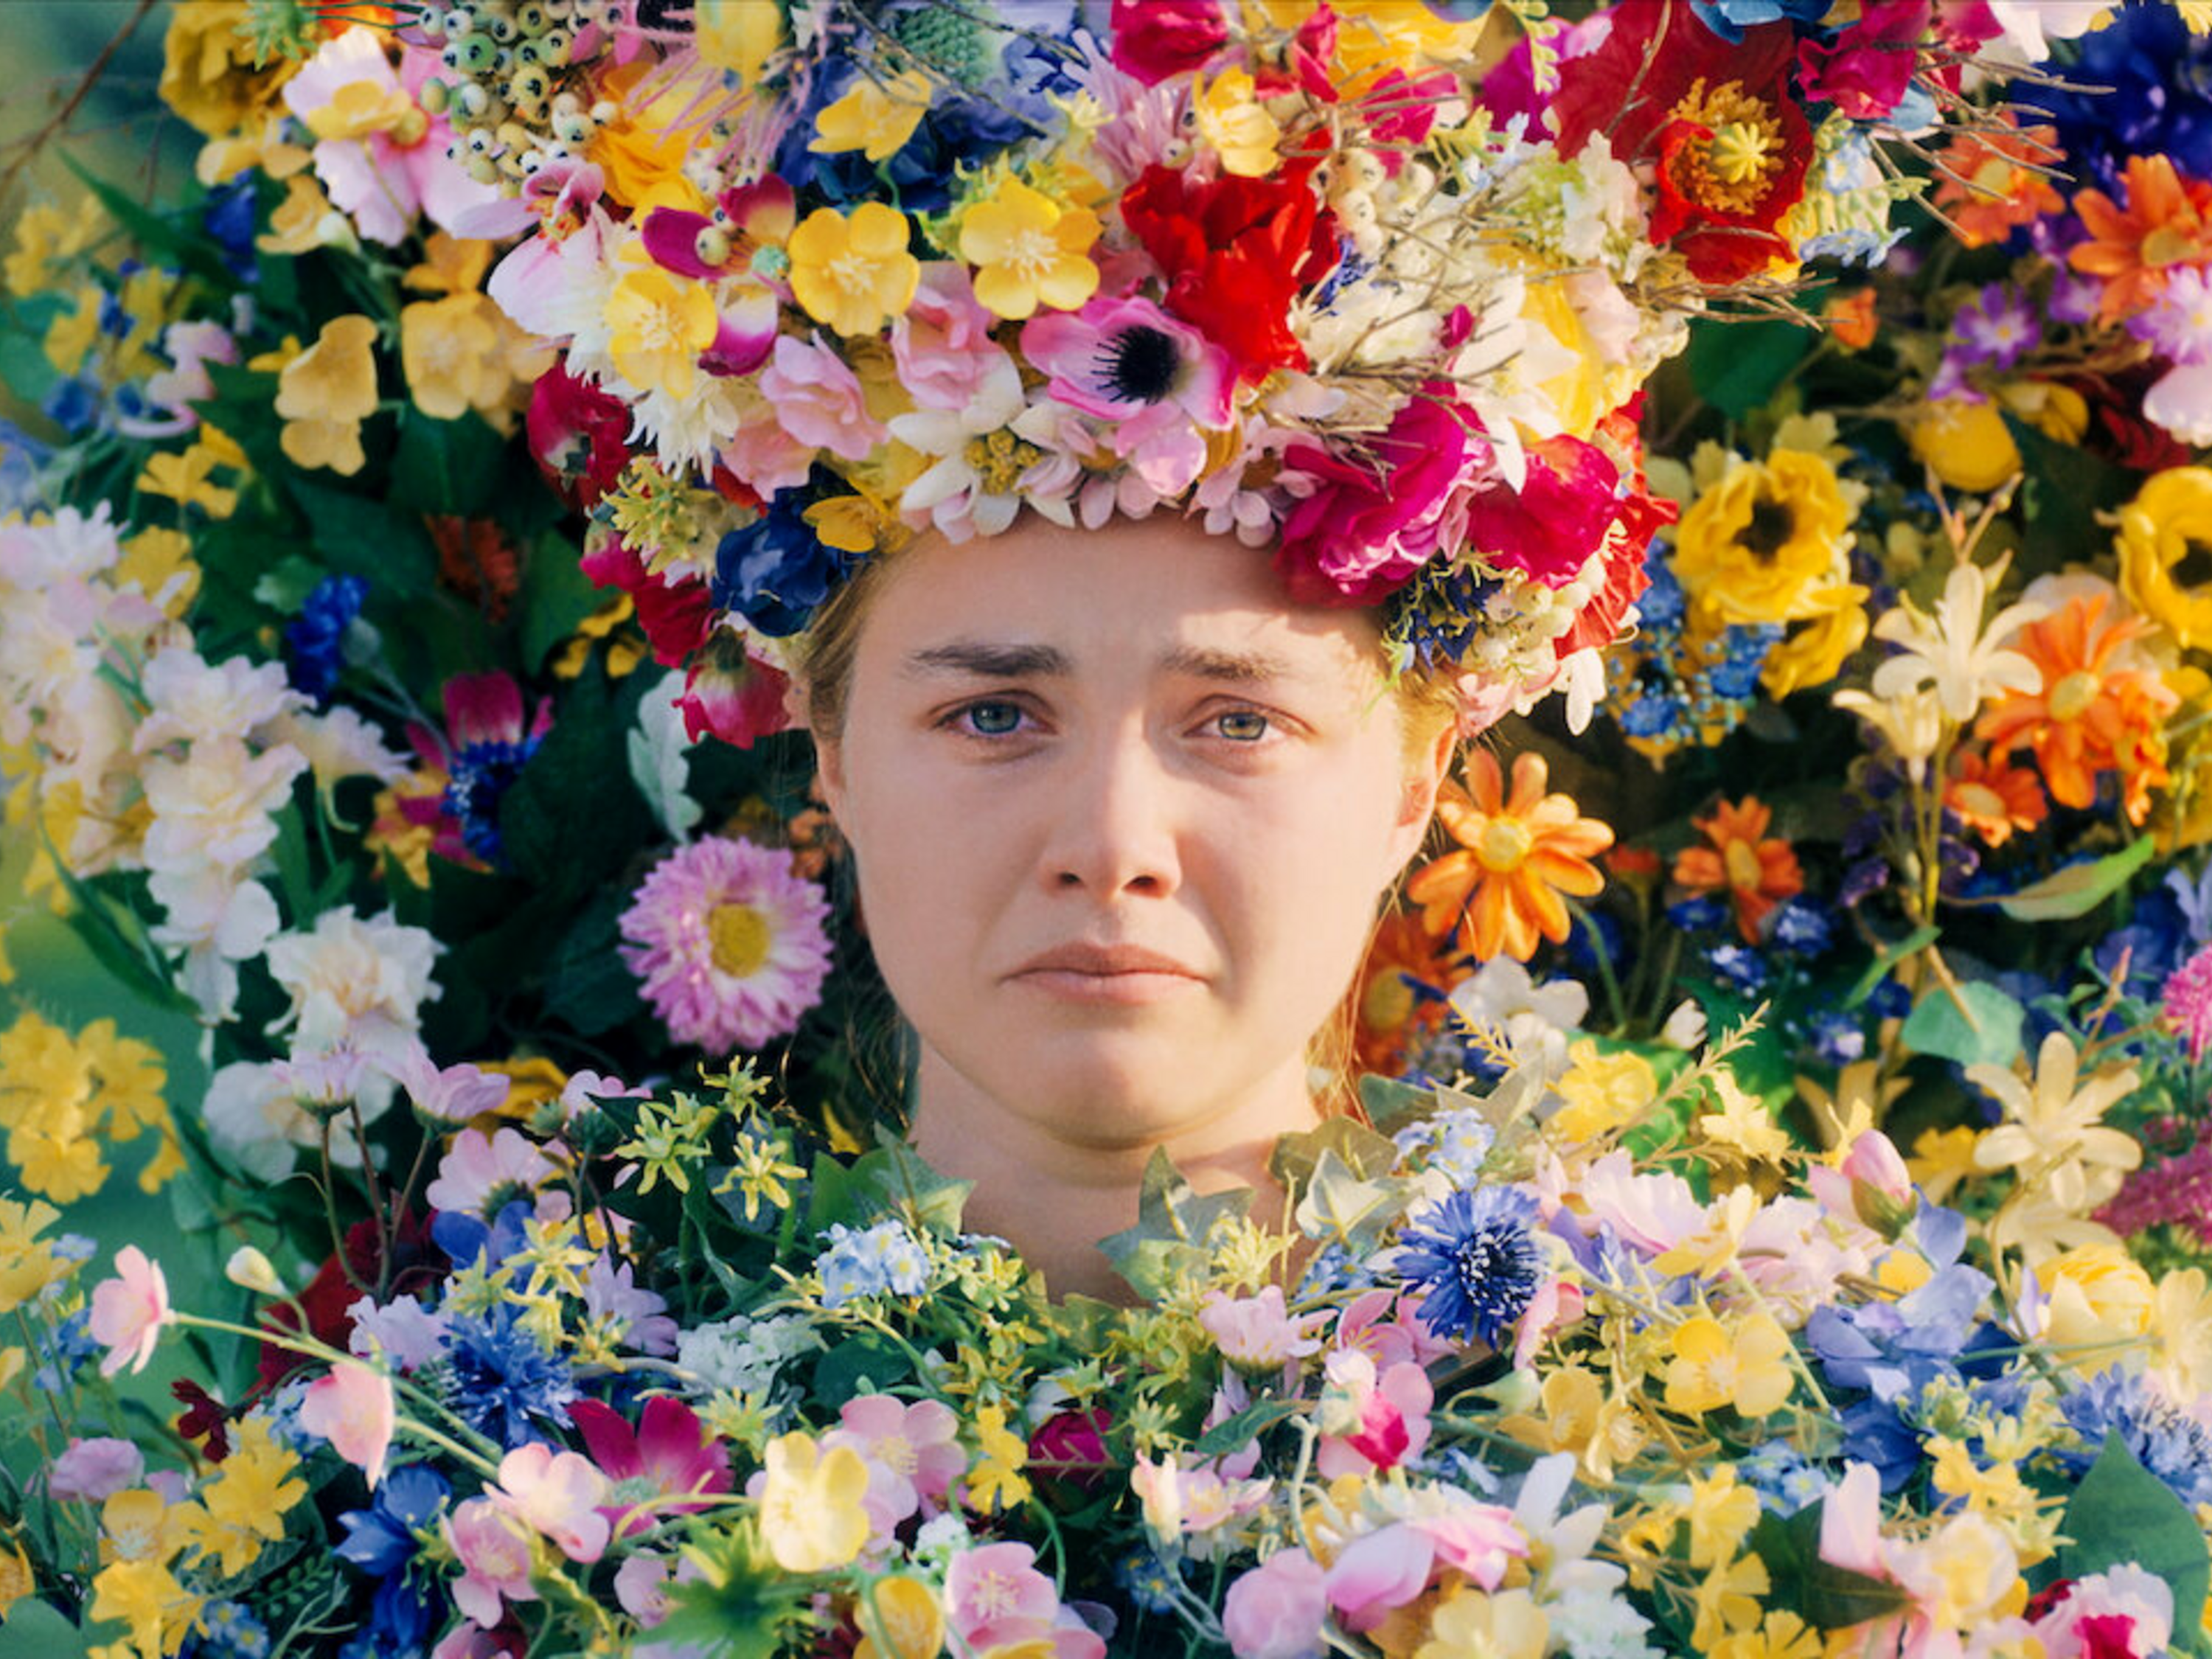 Person surrounded by assorted flowers with a large floral arrangement on their head. Expressing a solemn mood